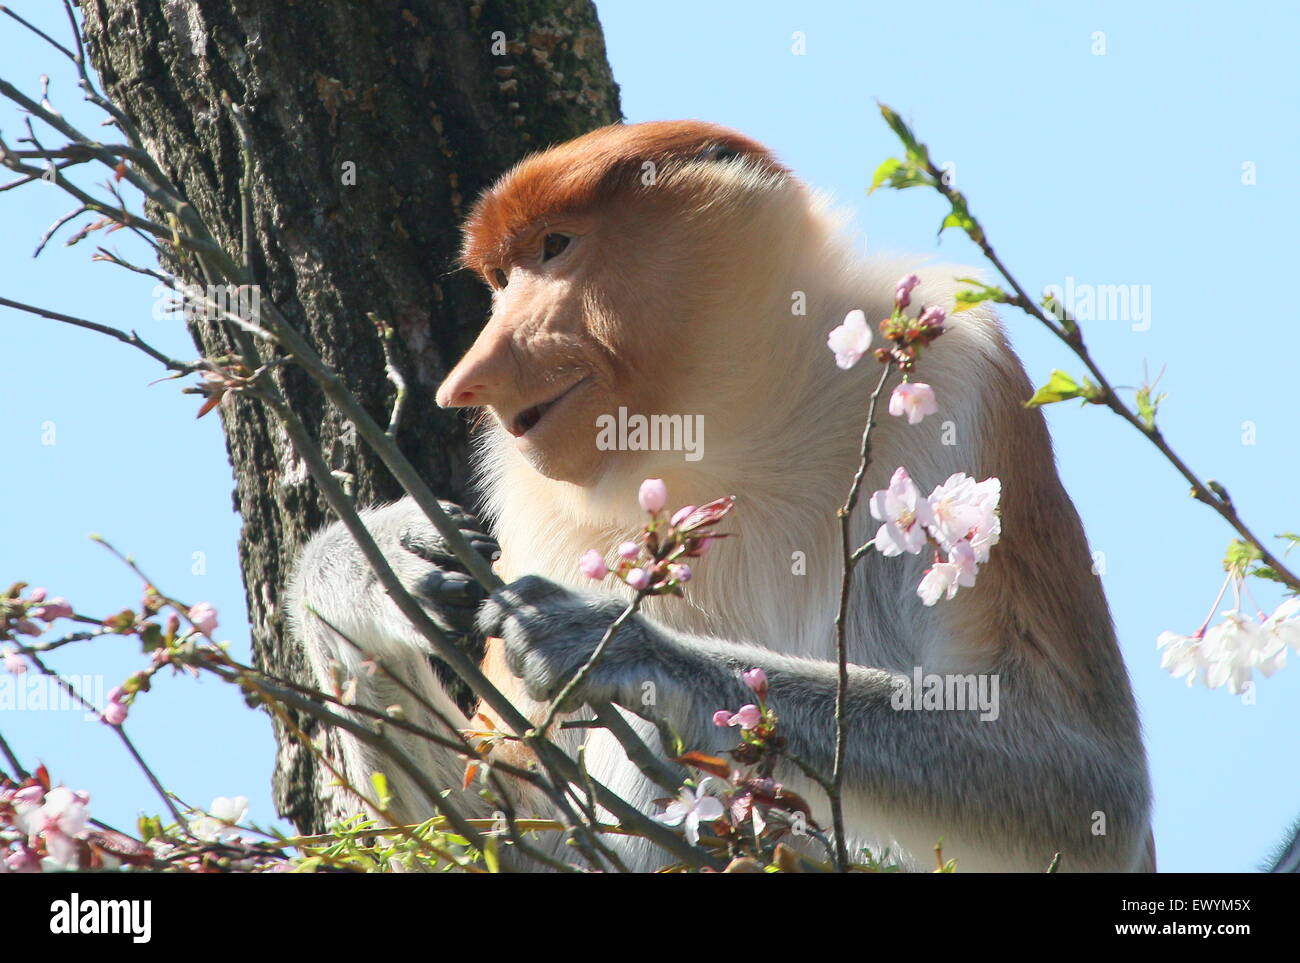 Mono Carayá, a native of South America. in the wild and natural state Stock  Photo - Alamy